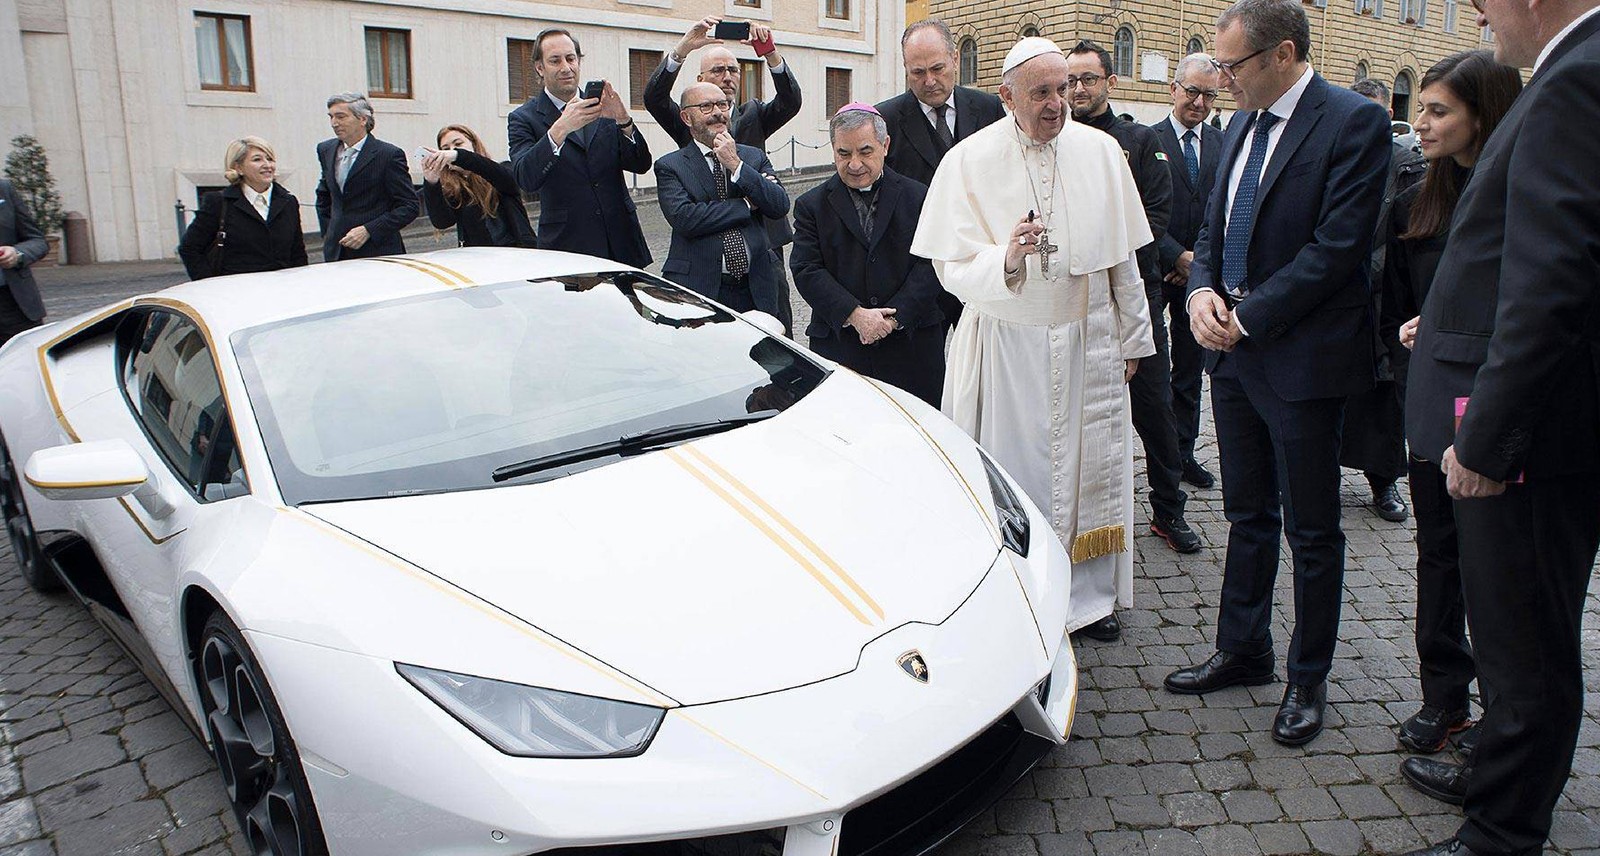 The Pope's Lamborghini Huracan Raises Over $850,000: Here's What We're Reading Today